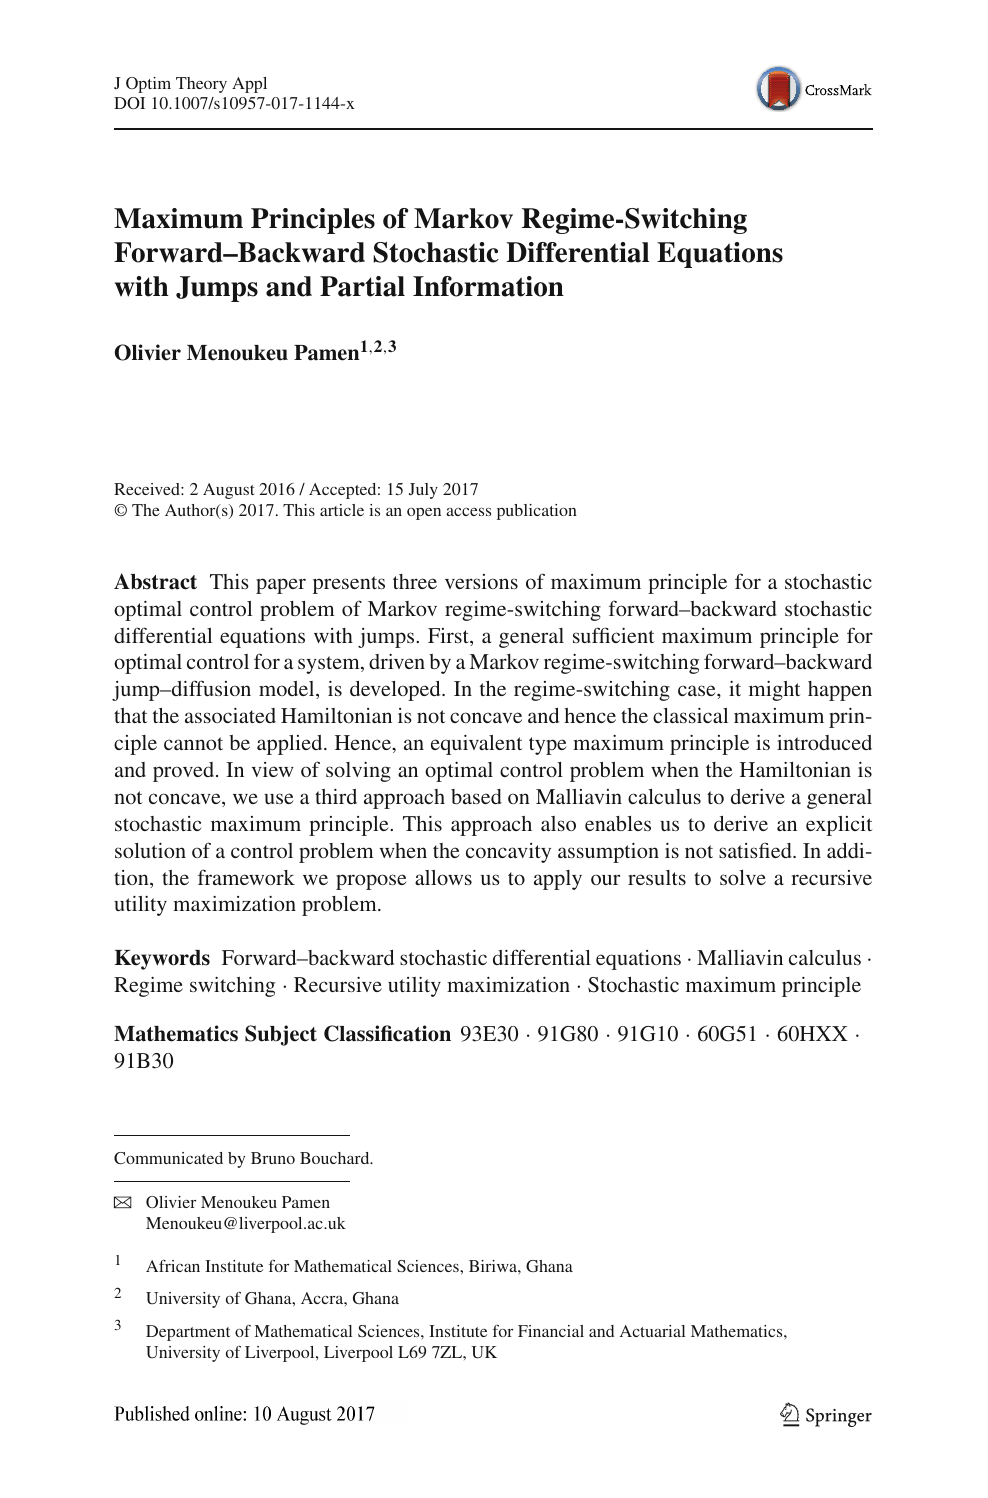 Maximum Principles Of Markov Regime Switching Forward Backward Stochastic Differential Equations With Jumps And Partial Information Topic Of Research Paper In Mathematics Download Scholarly Article Pdf And Read For Free On Cyberleninka Open